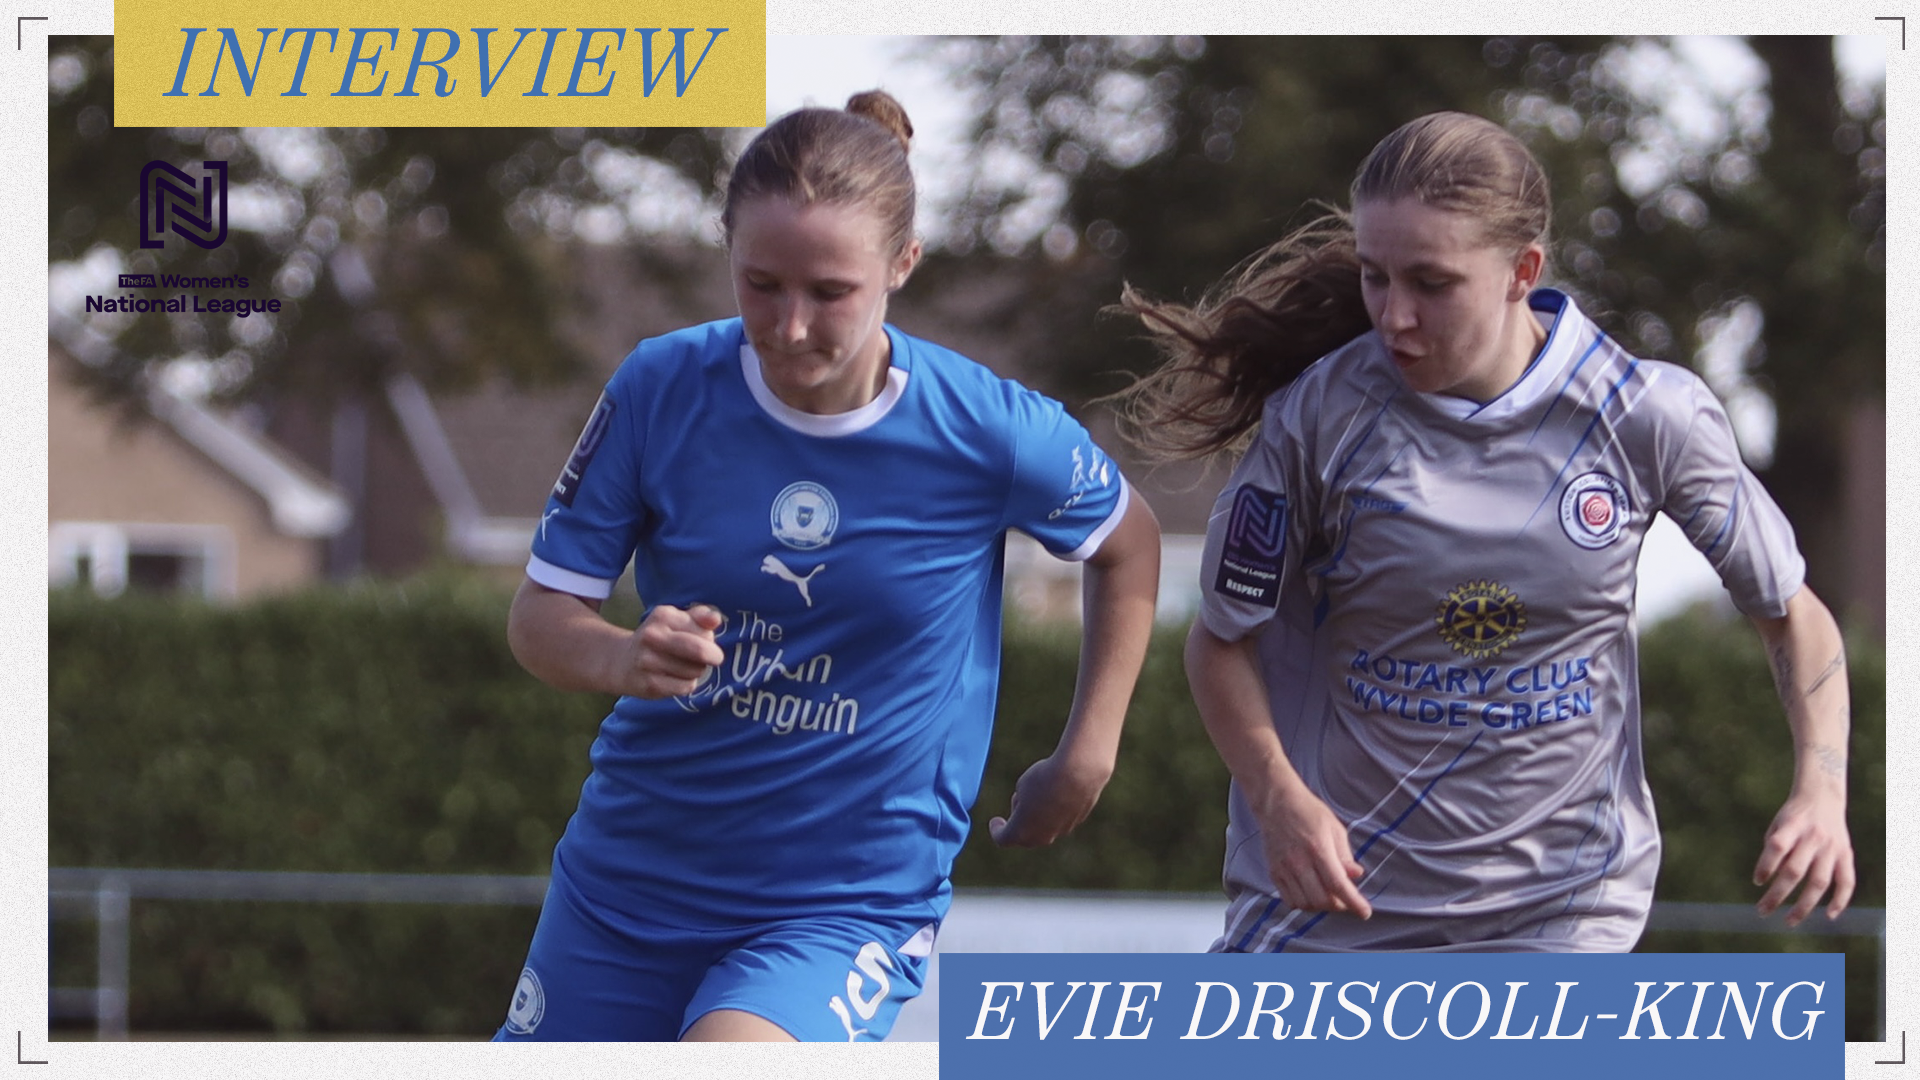 Evie Driscoll-King